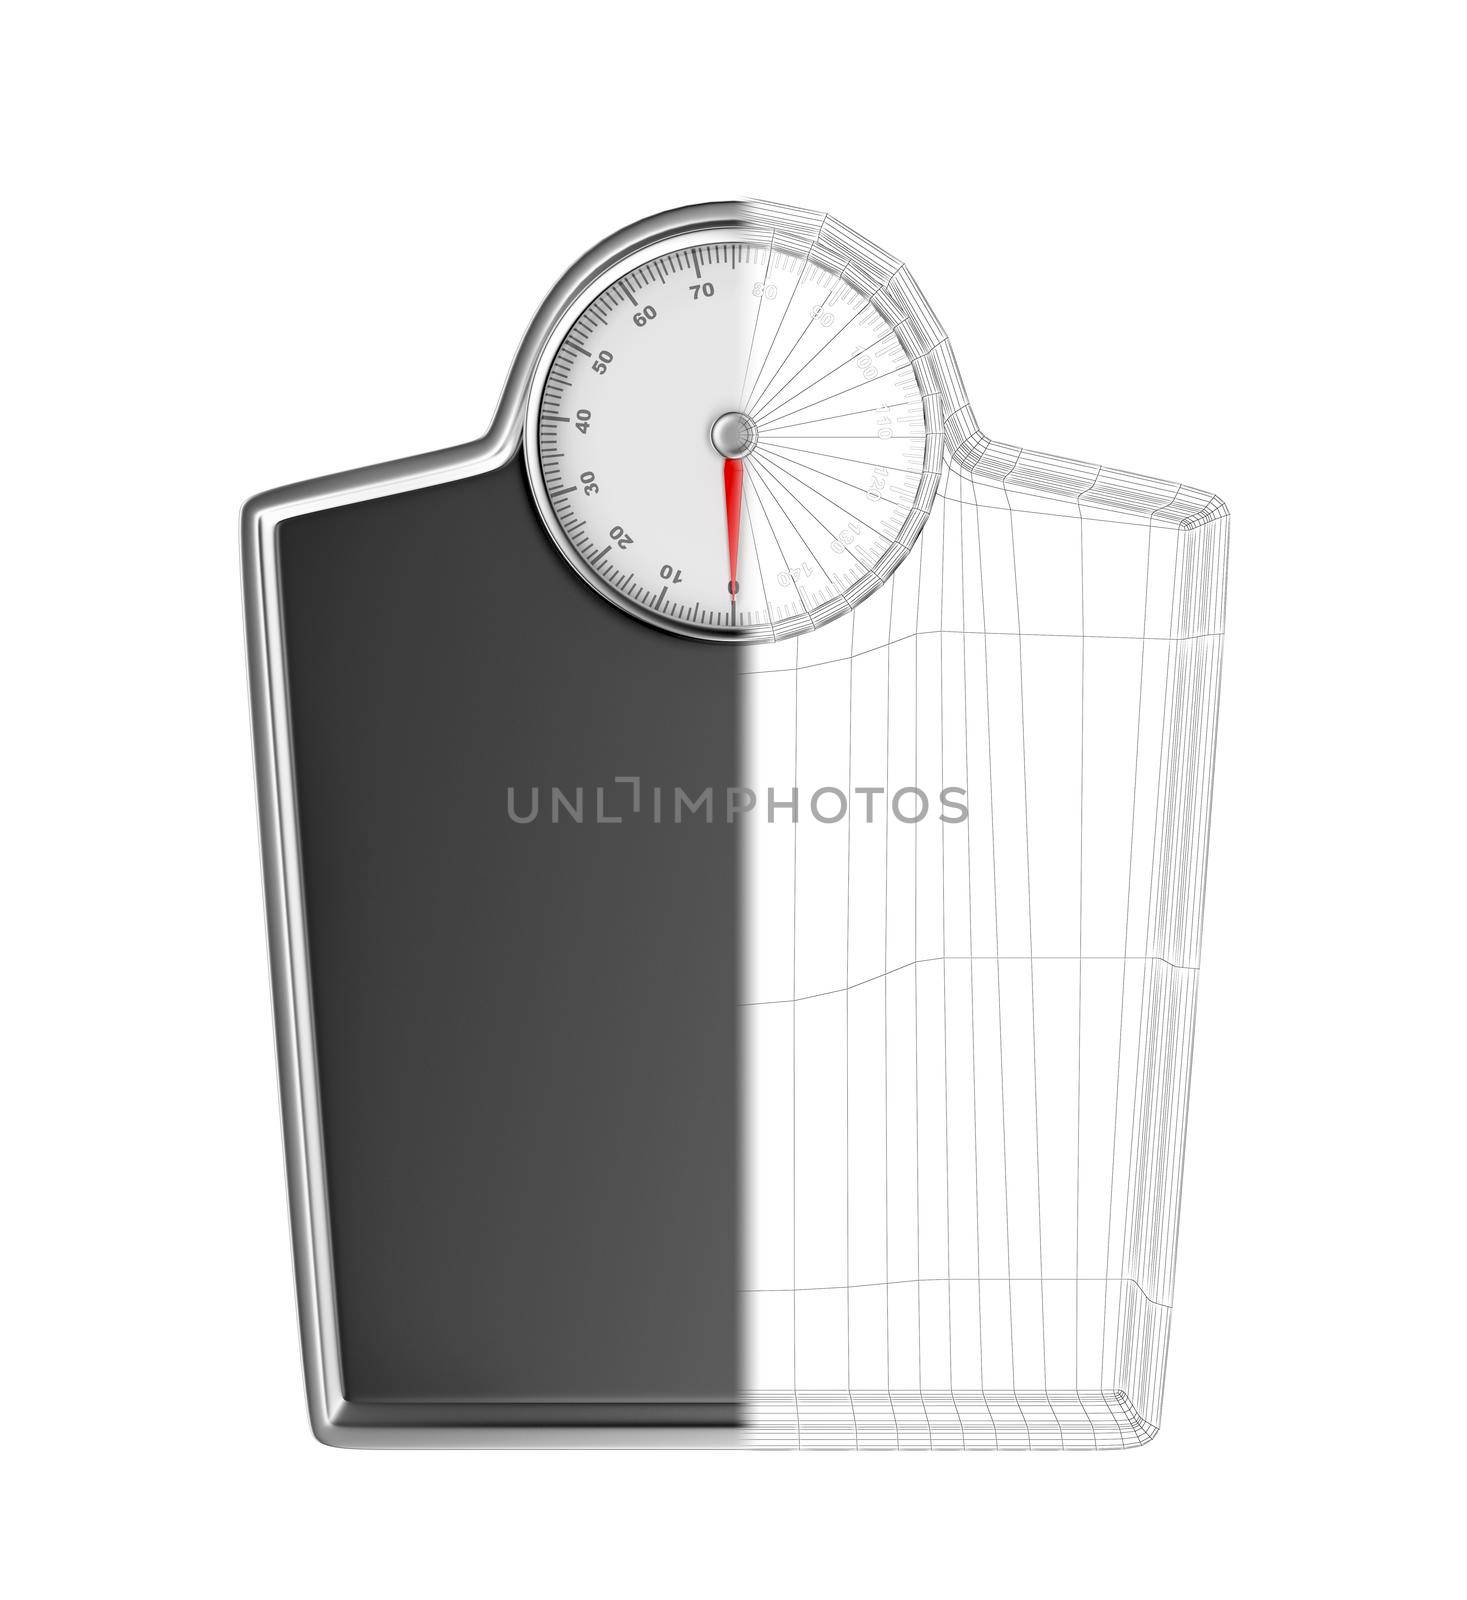 3D model of mechanical weighing scale by magraphics